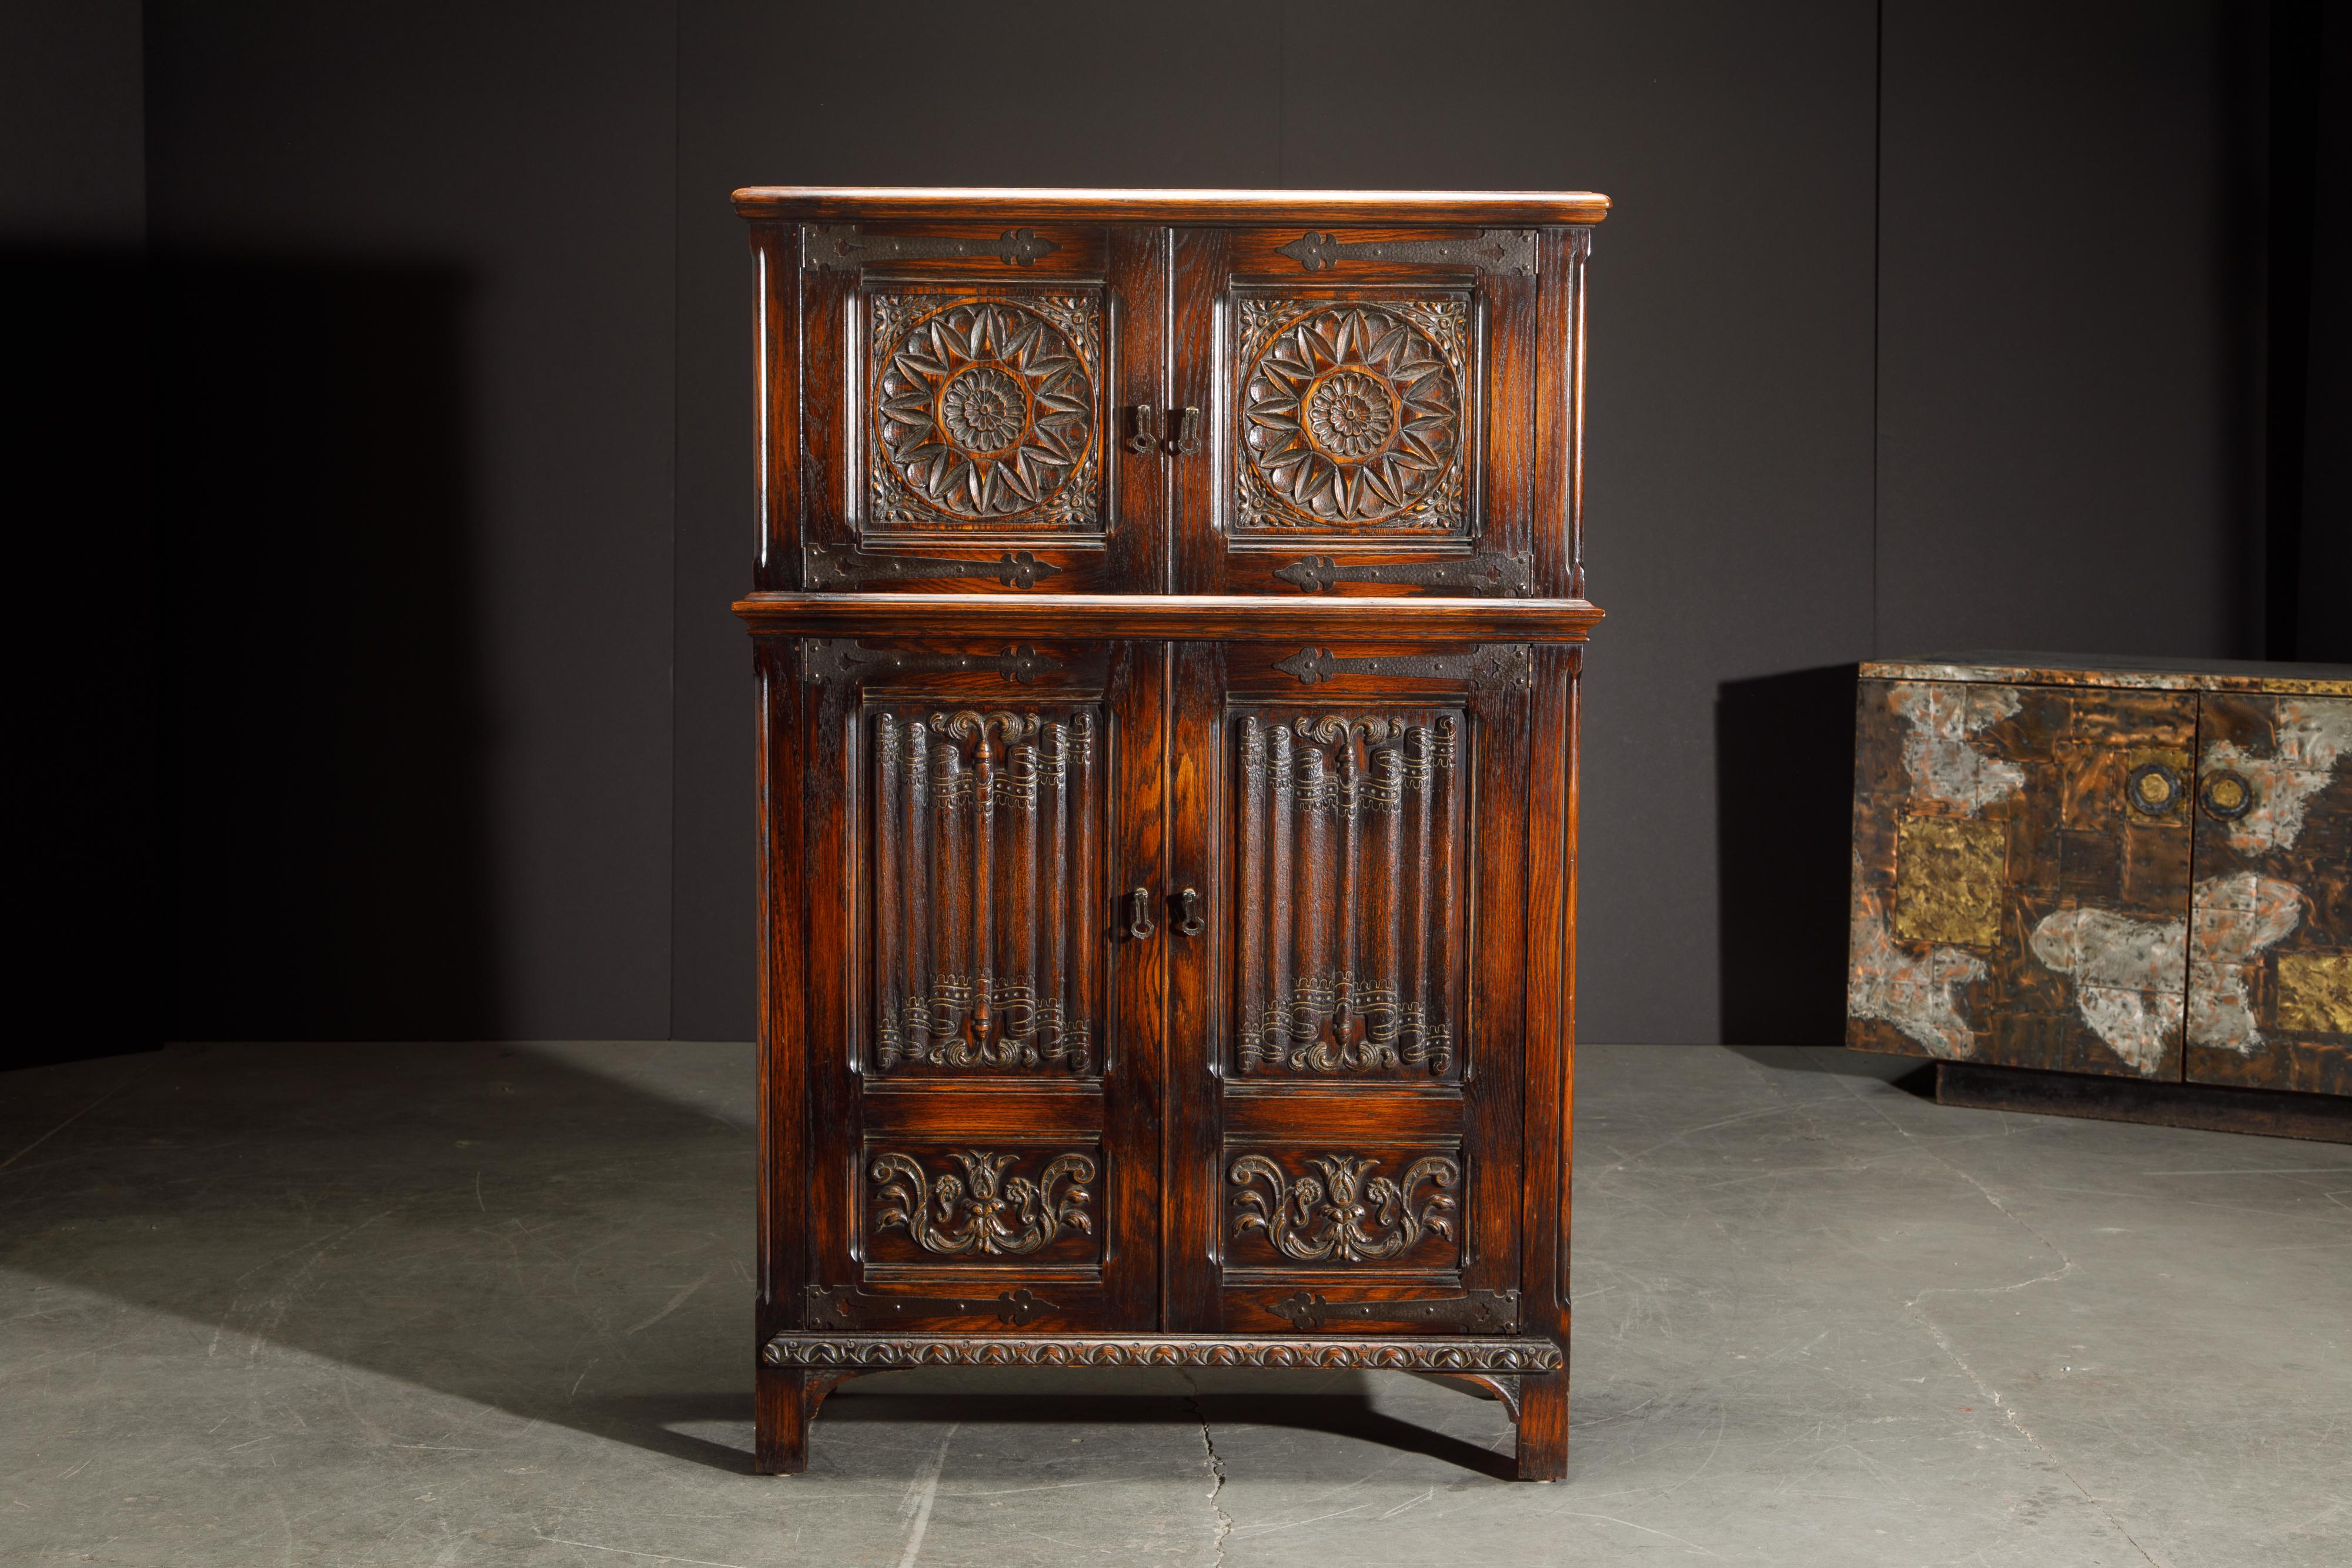 This gorgeous carved oak highboy cabinet is in the Jacobean Revival style with intricate detailing and ample storage space. We also have in other listings the matching pieces from this set which include a sideboard credenza, lowboy server cabinet